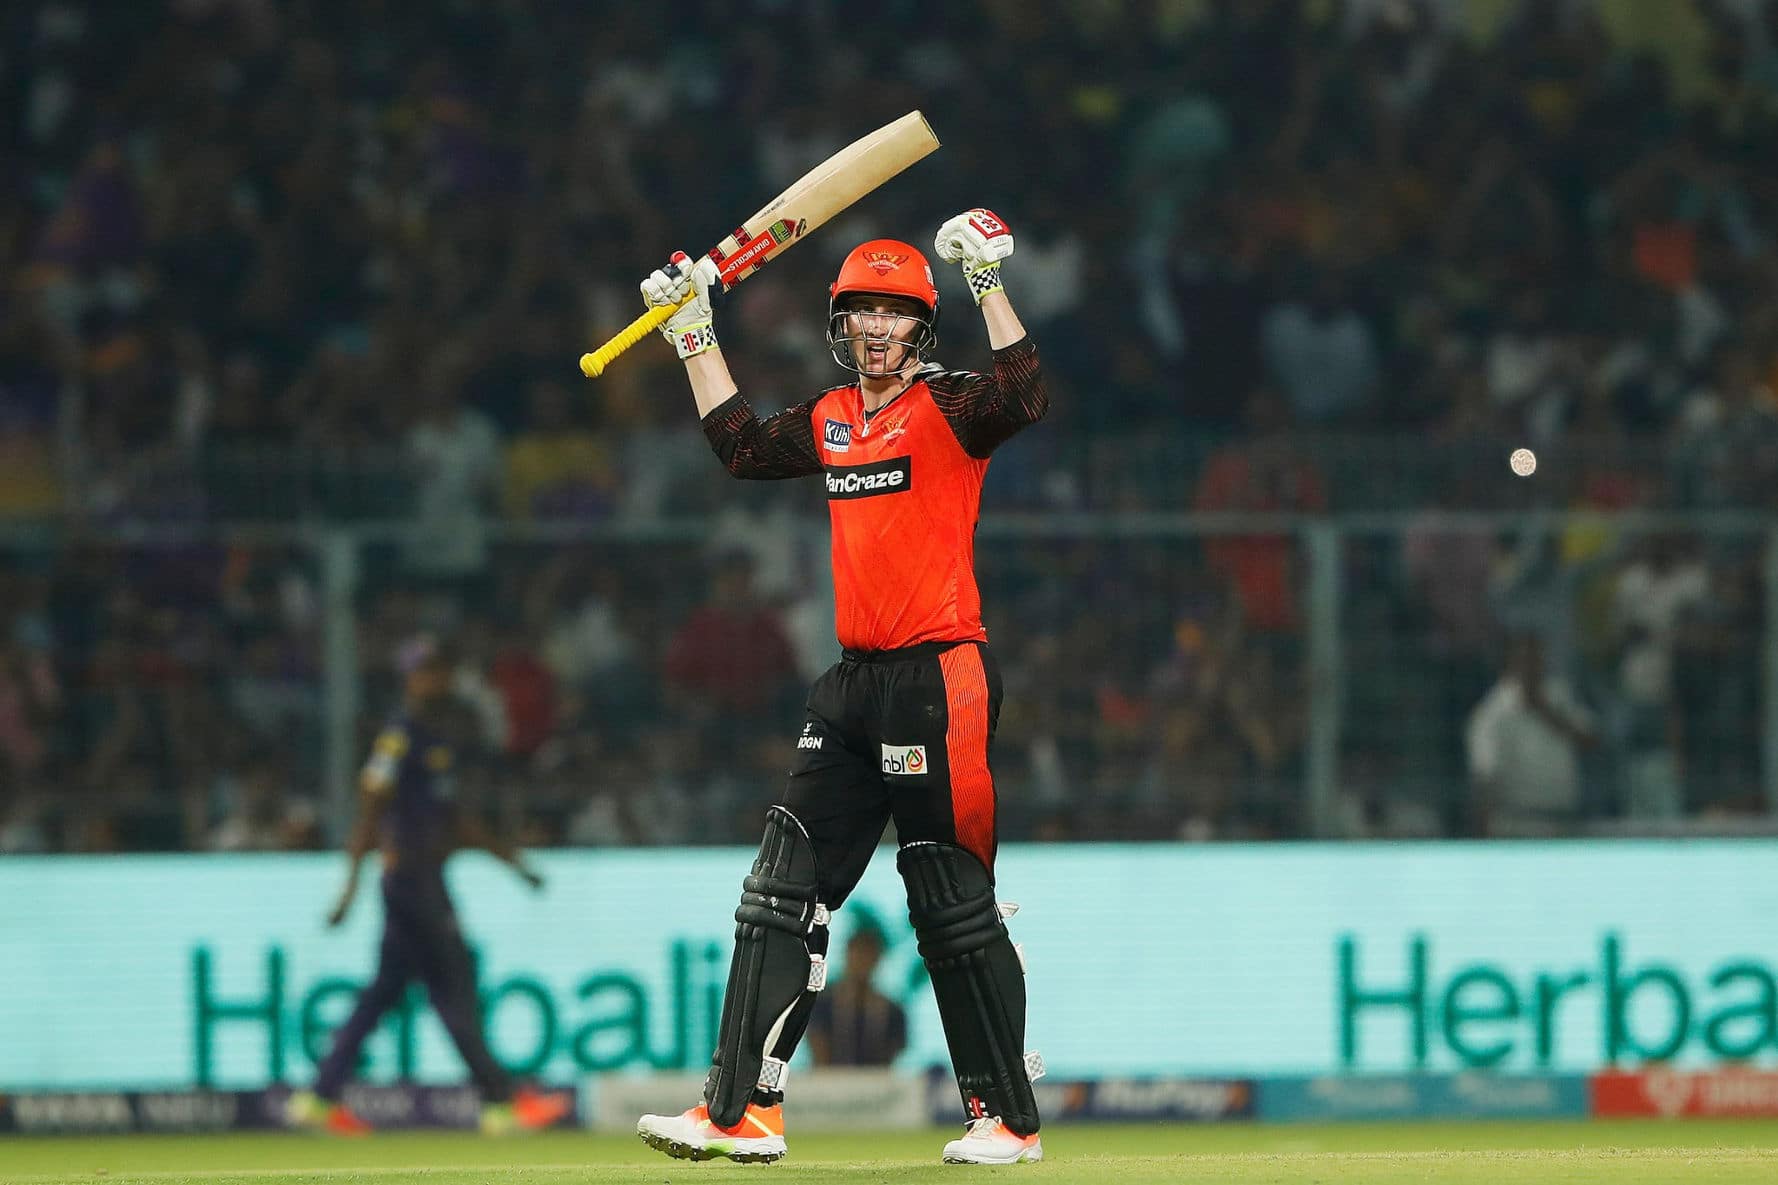 'Thank You To Evеryonе'- Harry Brook Thanks SRH For Giving Him First Opportunity In IPL